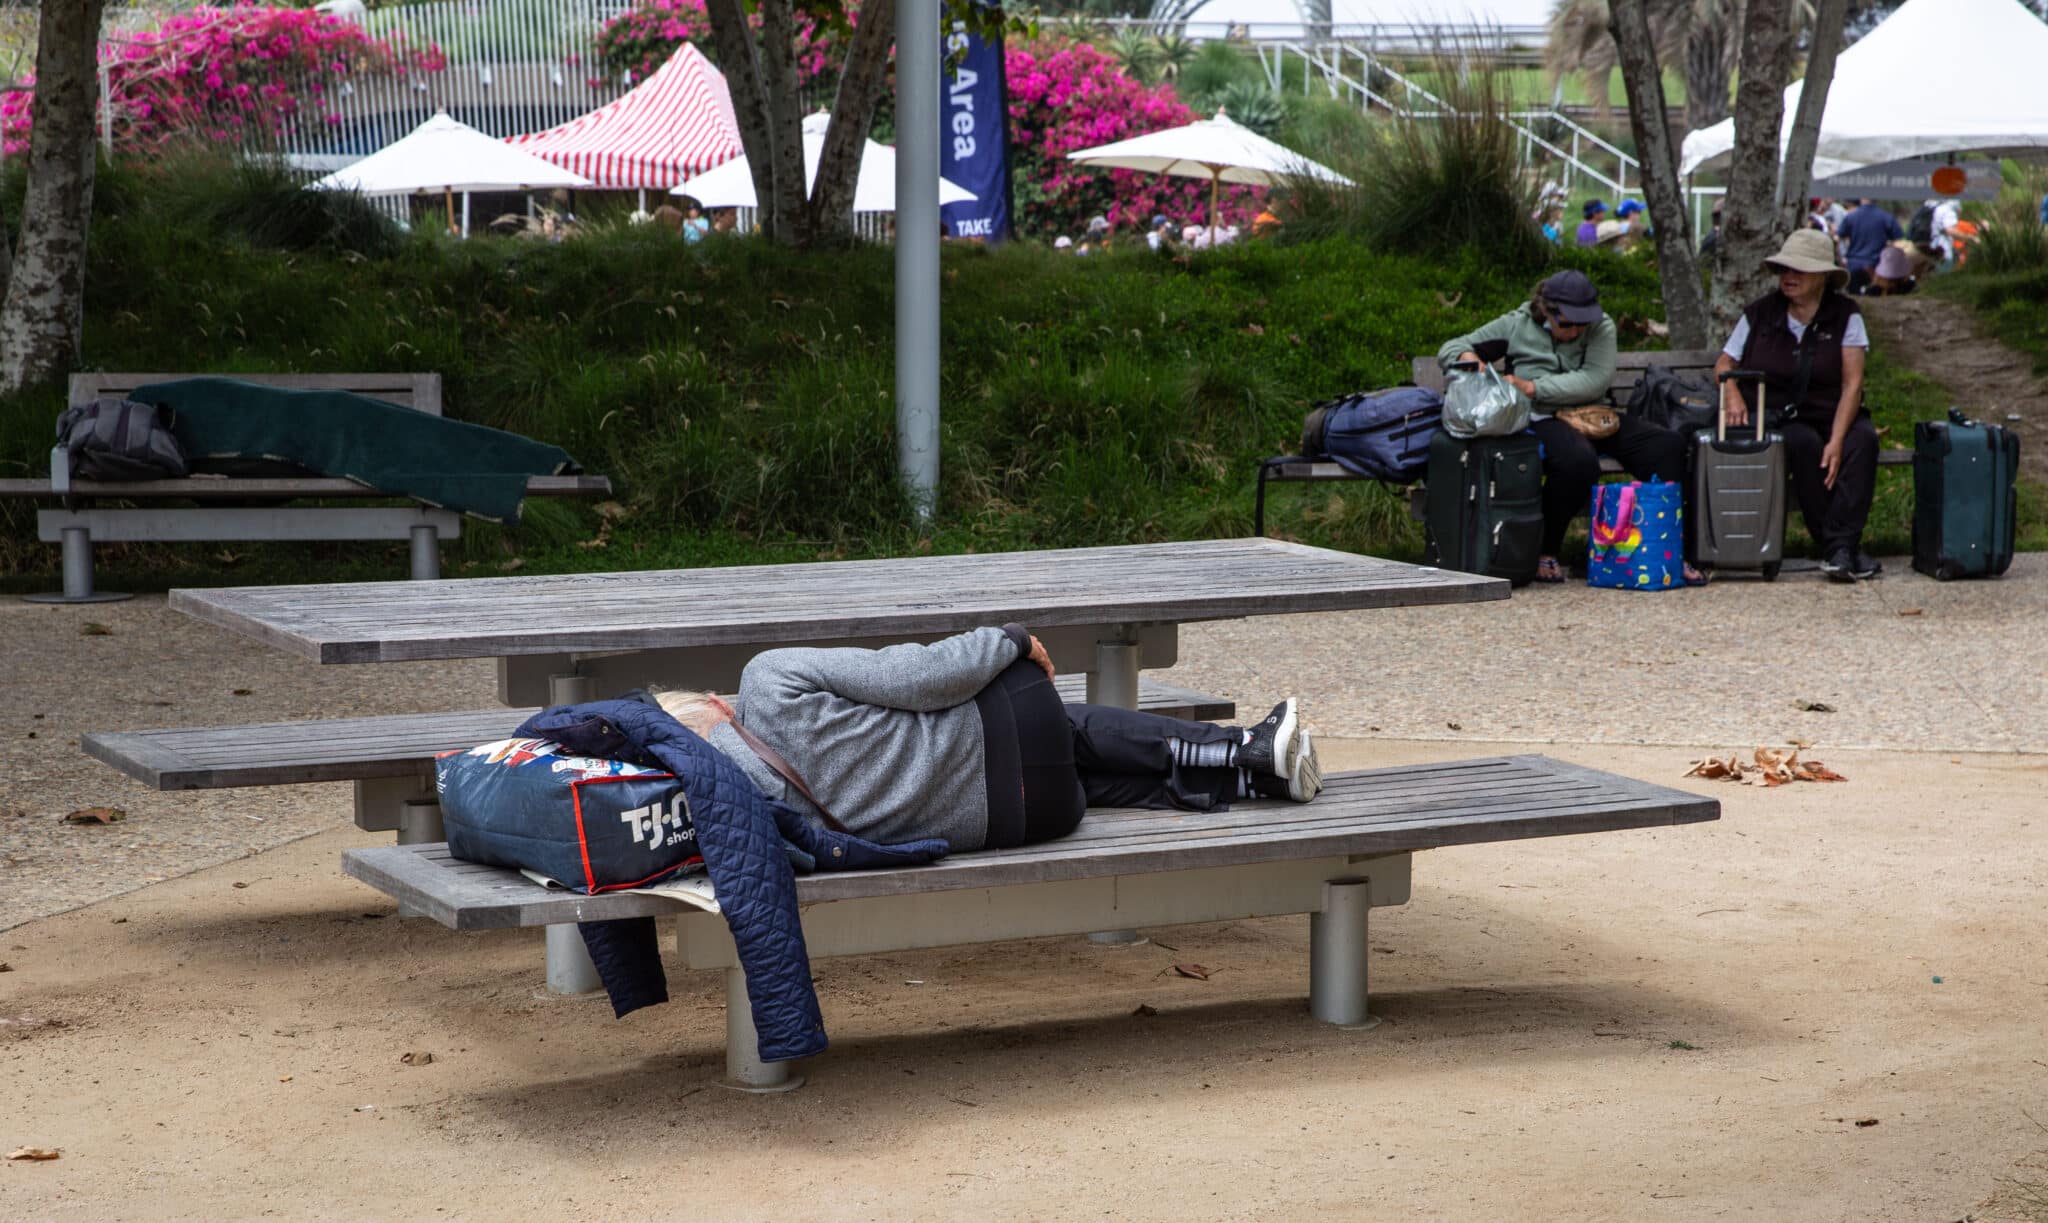 SANTA MONICA, CA - JUNE 12:  A homeless man sleeps in the six-acre Tongva Park, a relatively new urban community oasis filled with interesting architecture, walkways, landscaping, and native vegetation and located between the Santa Monica Pier and City Hall, is viewed on June 12, 2022, in Santa Monica, California. Santa Monica has been a popular beach destination for millions of tourists, Southern Californians, and the homeless hoping to escape the interior heat for more than a hundred years. (Photo by George Rose/Getty Images)